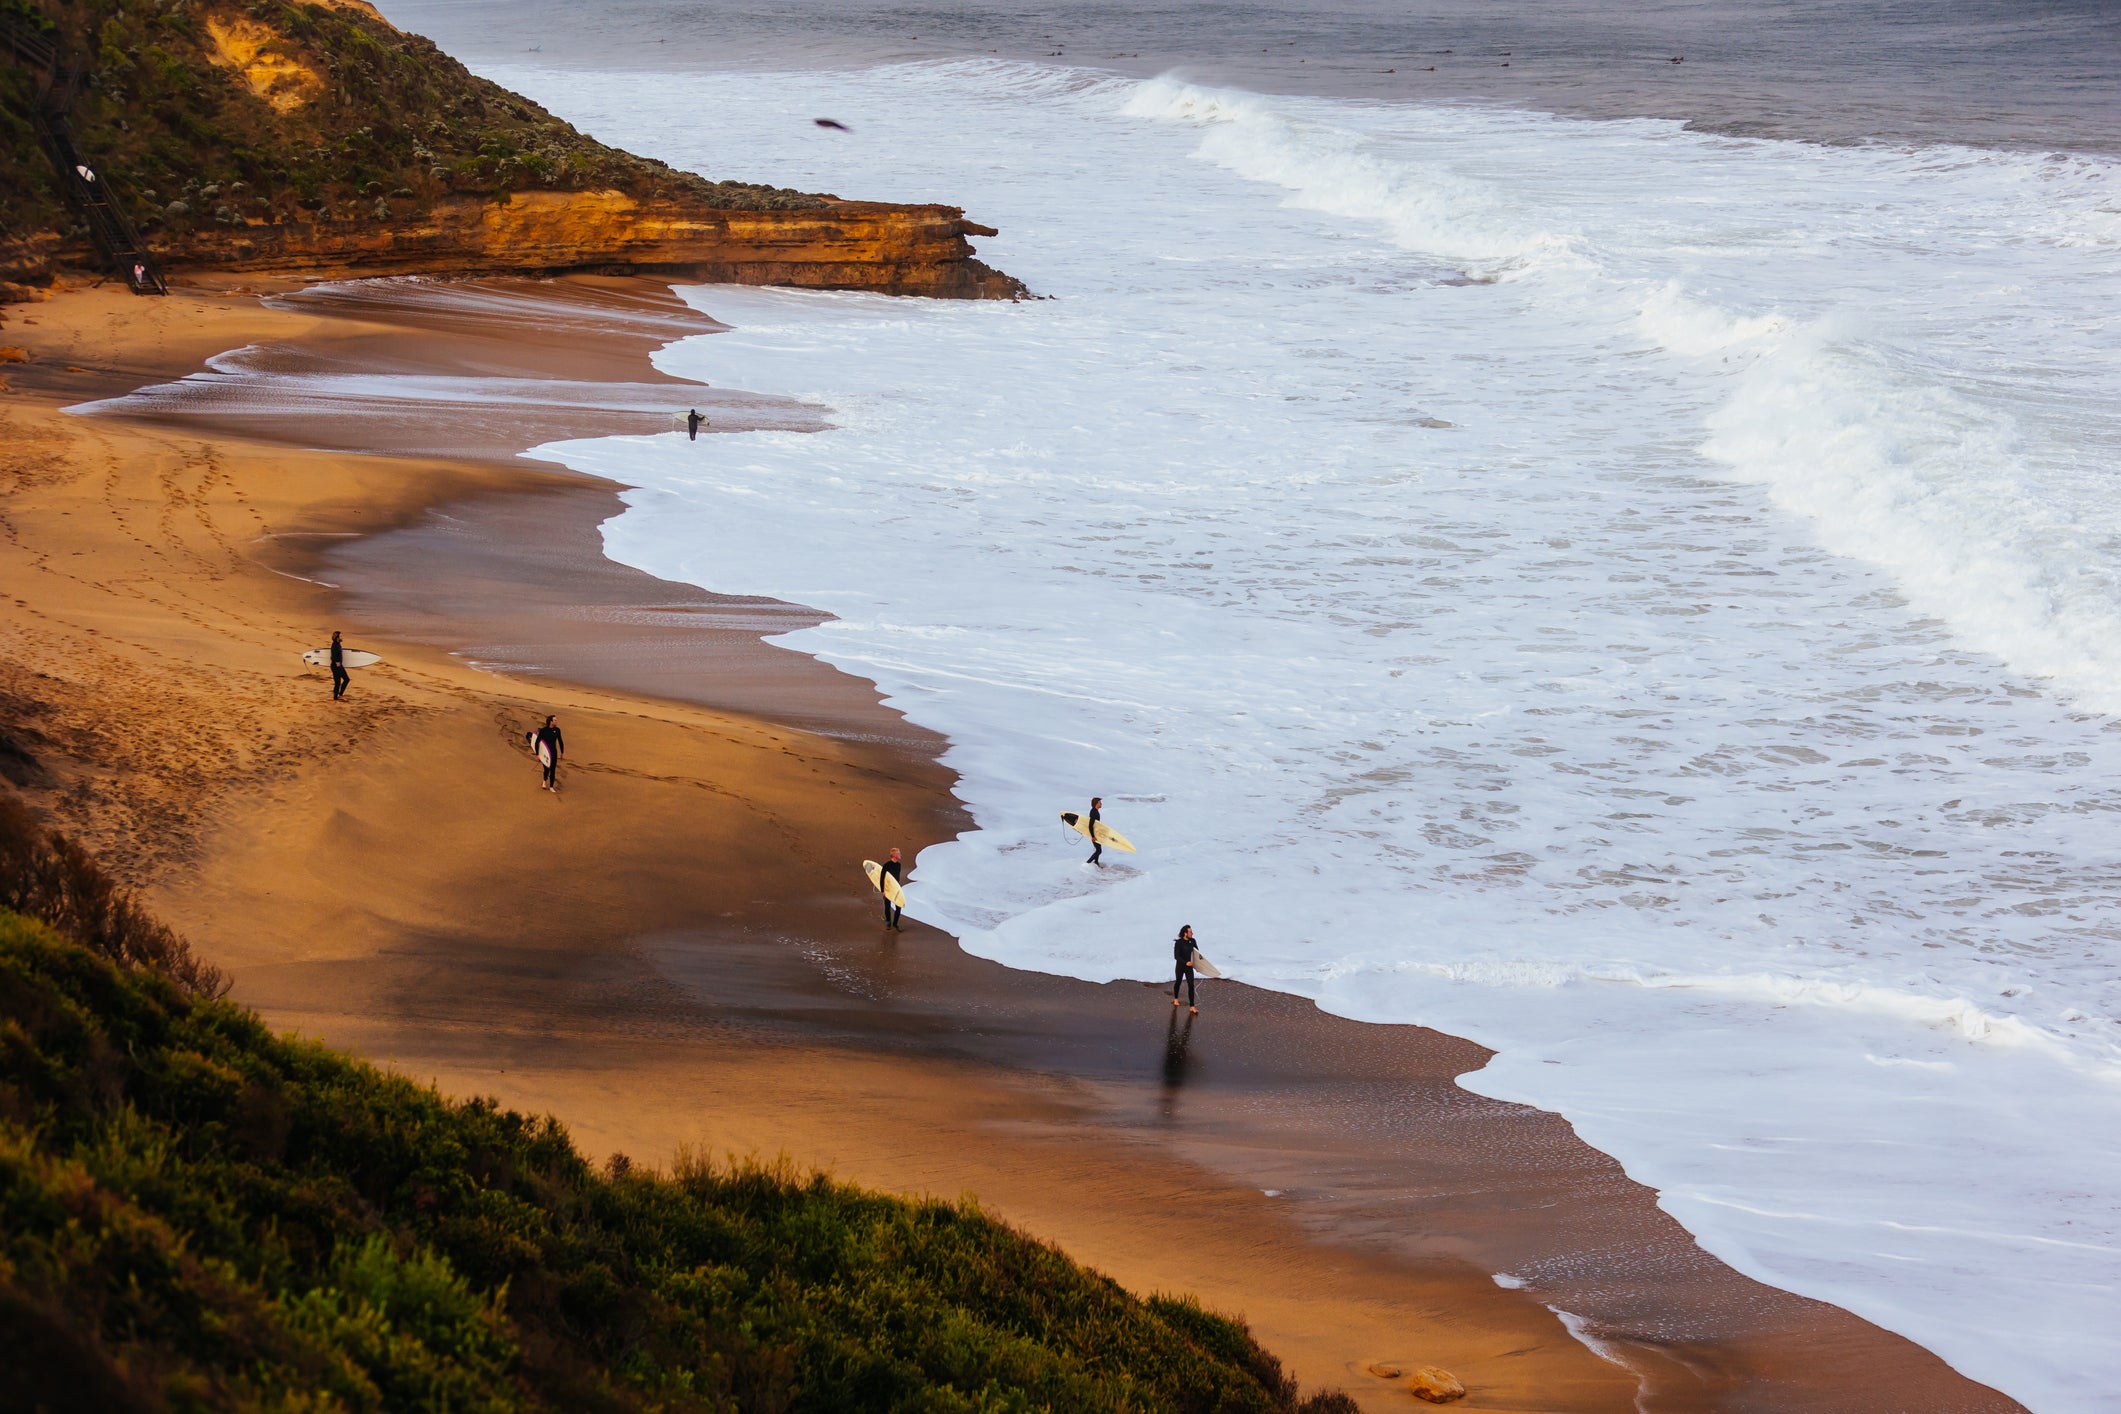 On the Great Ocean Road, Bells Beach is a surfer's paradise